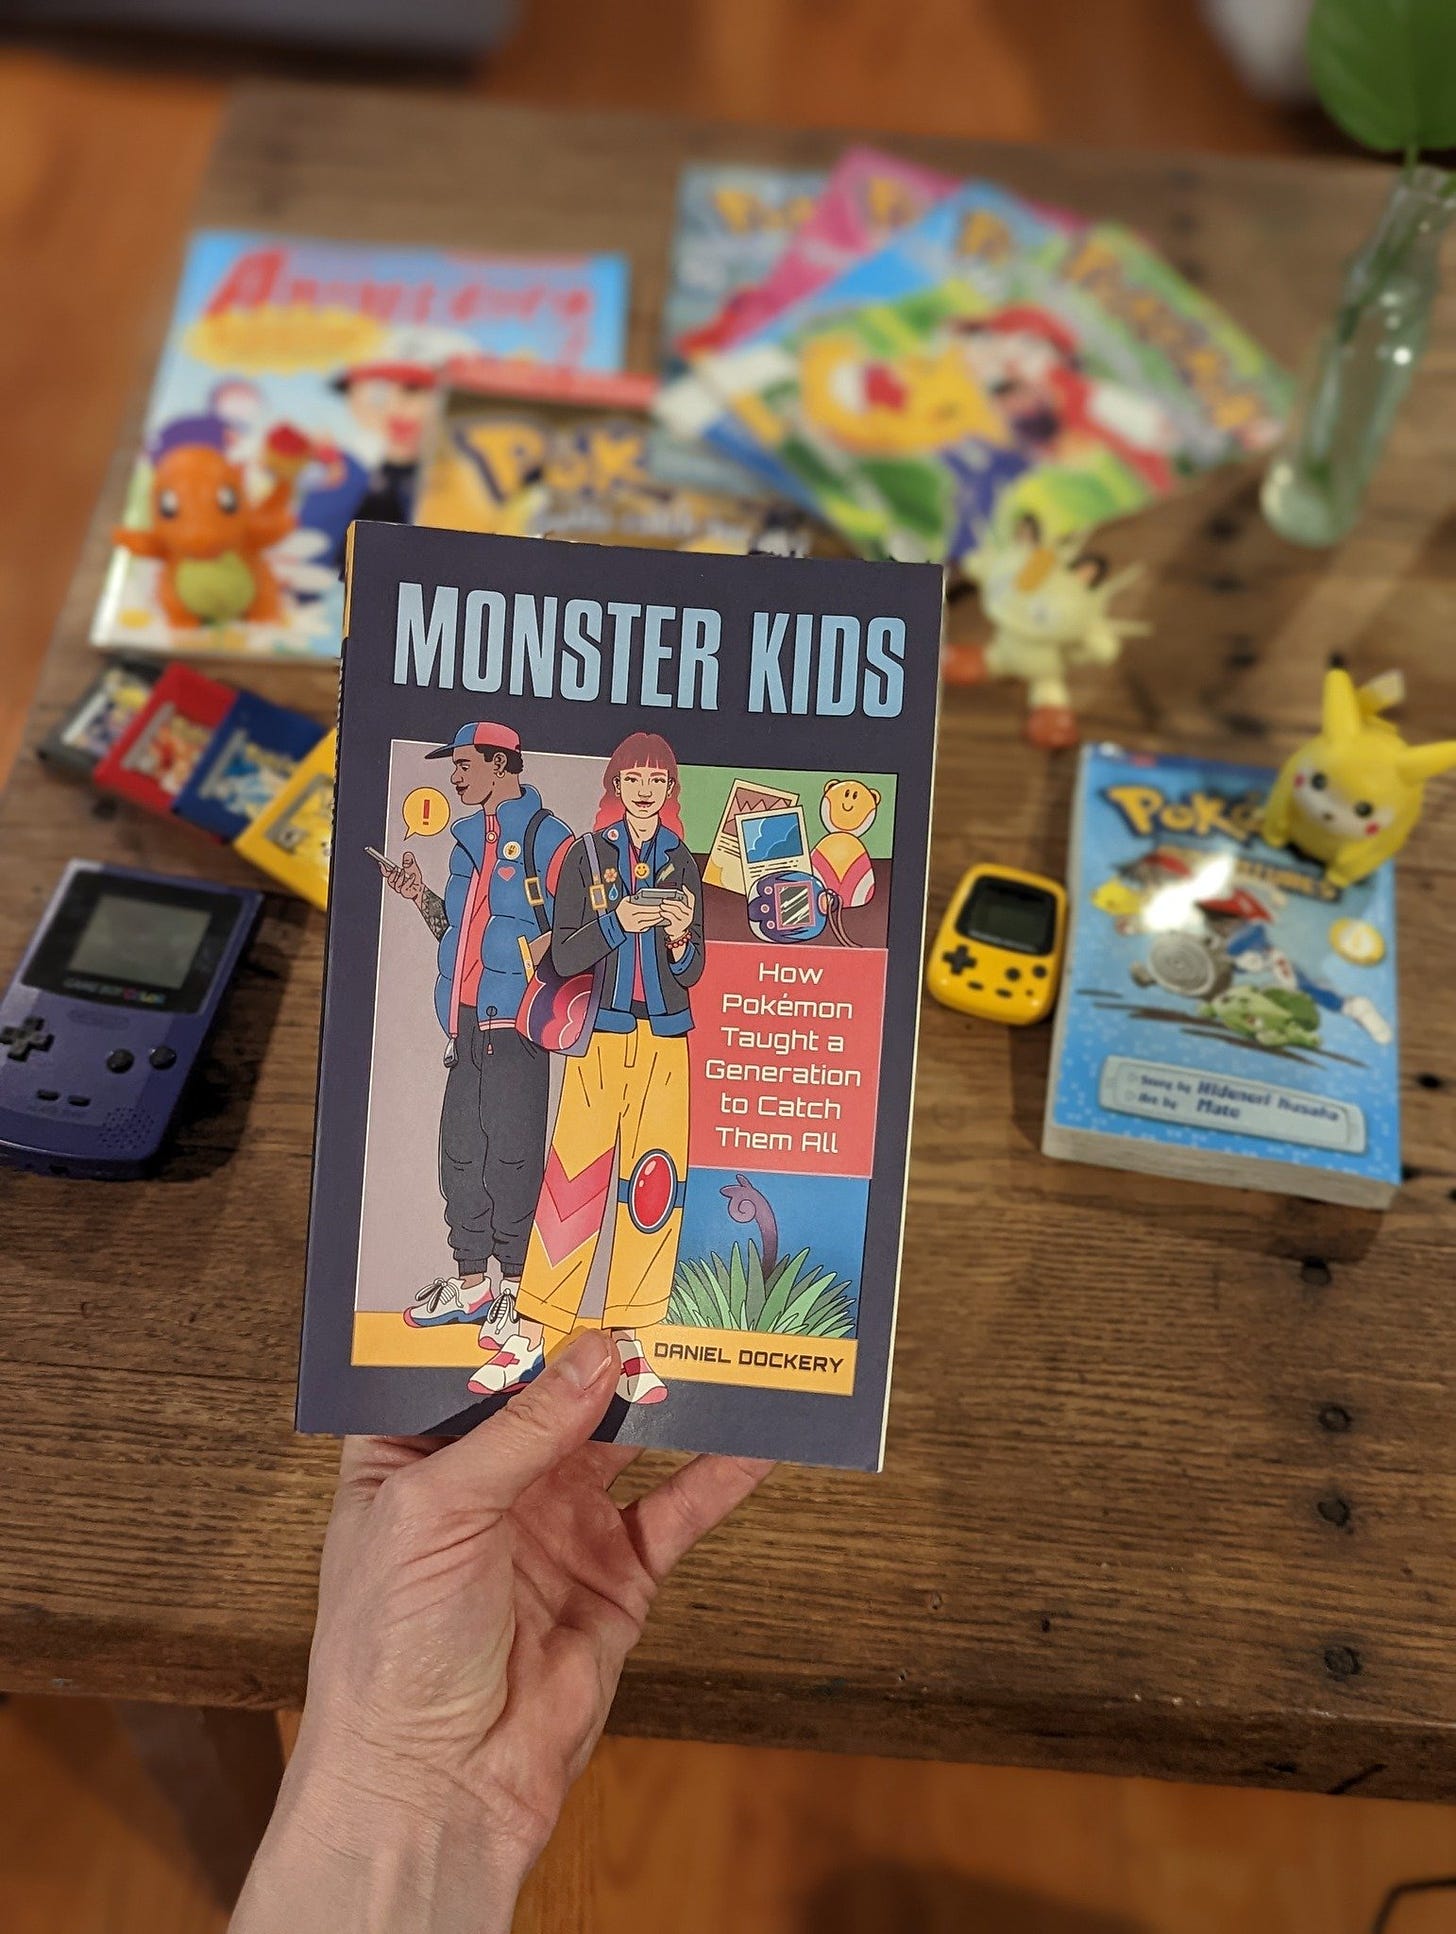 A photograph from Daniel with his copy of Monster Kids, surrounded by some of his Pokémon belongings. The book is available in paperback, eBook, and audiobook